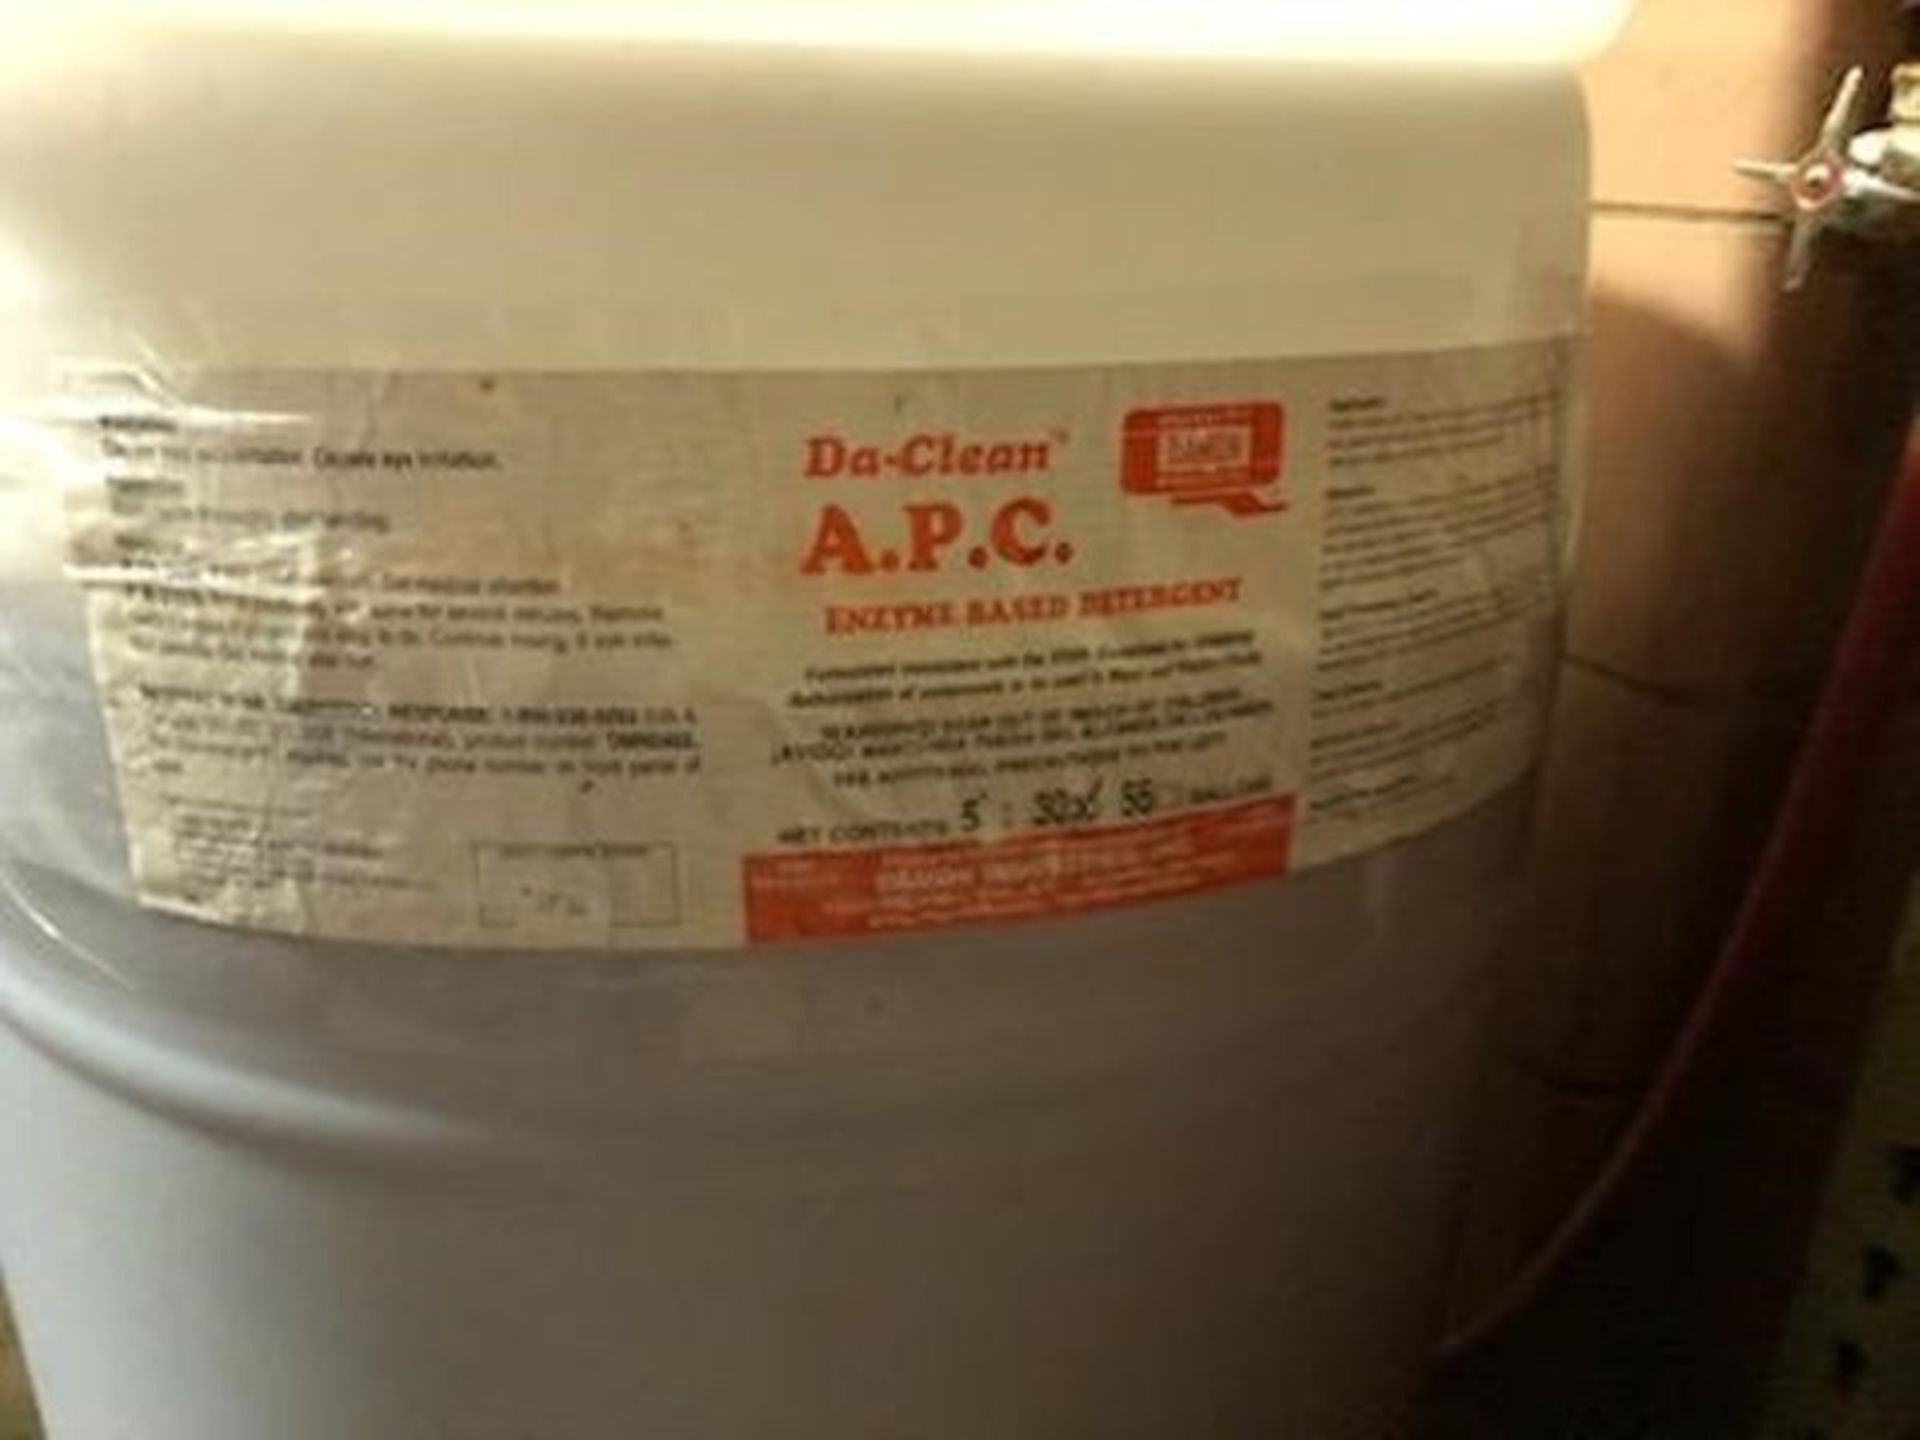 Damon Mdl. A.P.C. Enzyme Base Detergent with hand pump, approx. 50 gallons (Required Loading Fee $ - Image 2 of 2